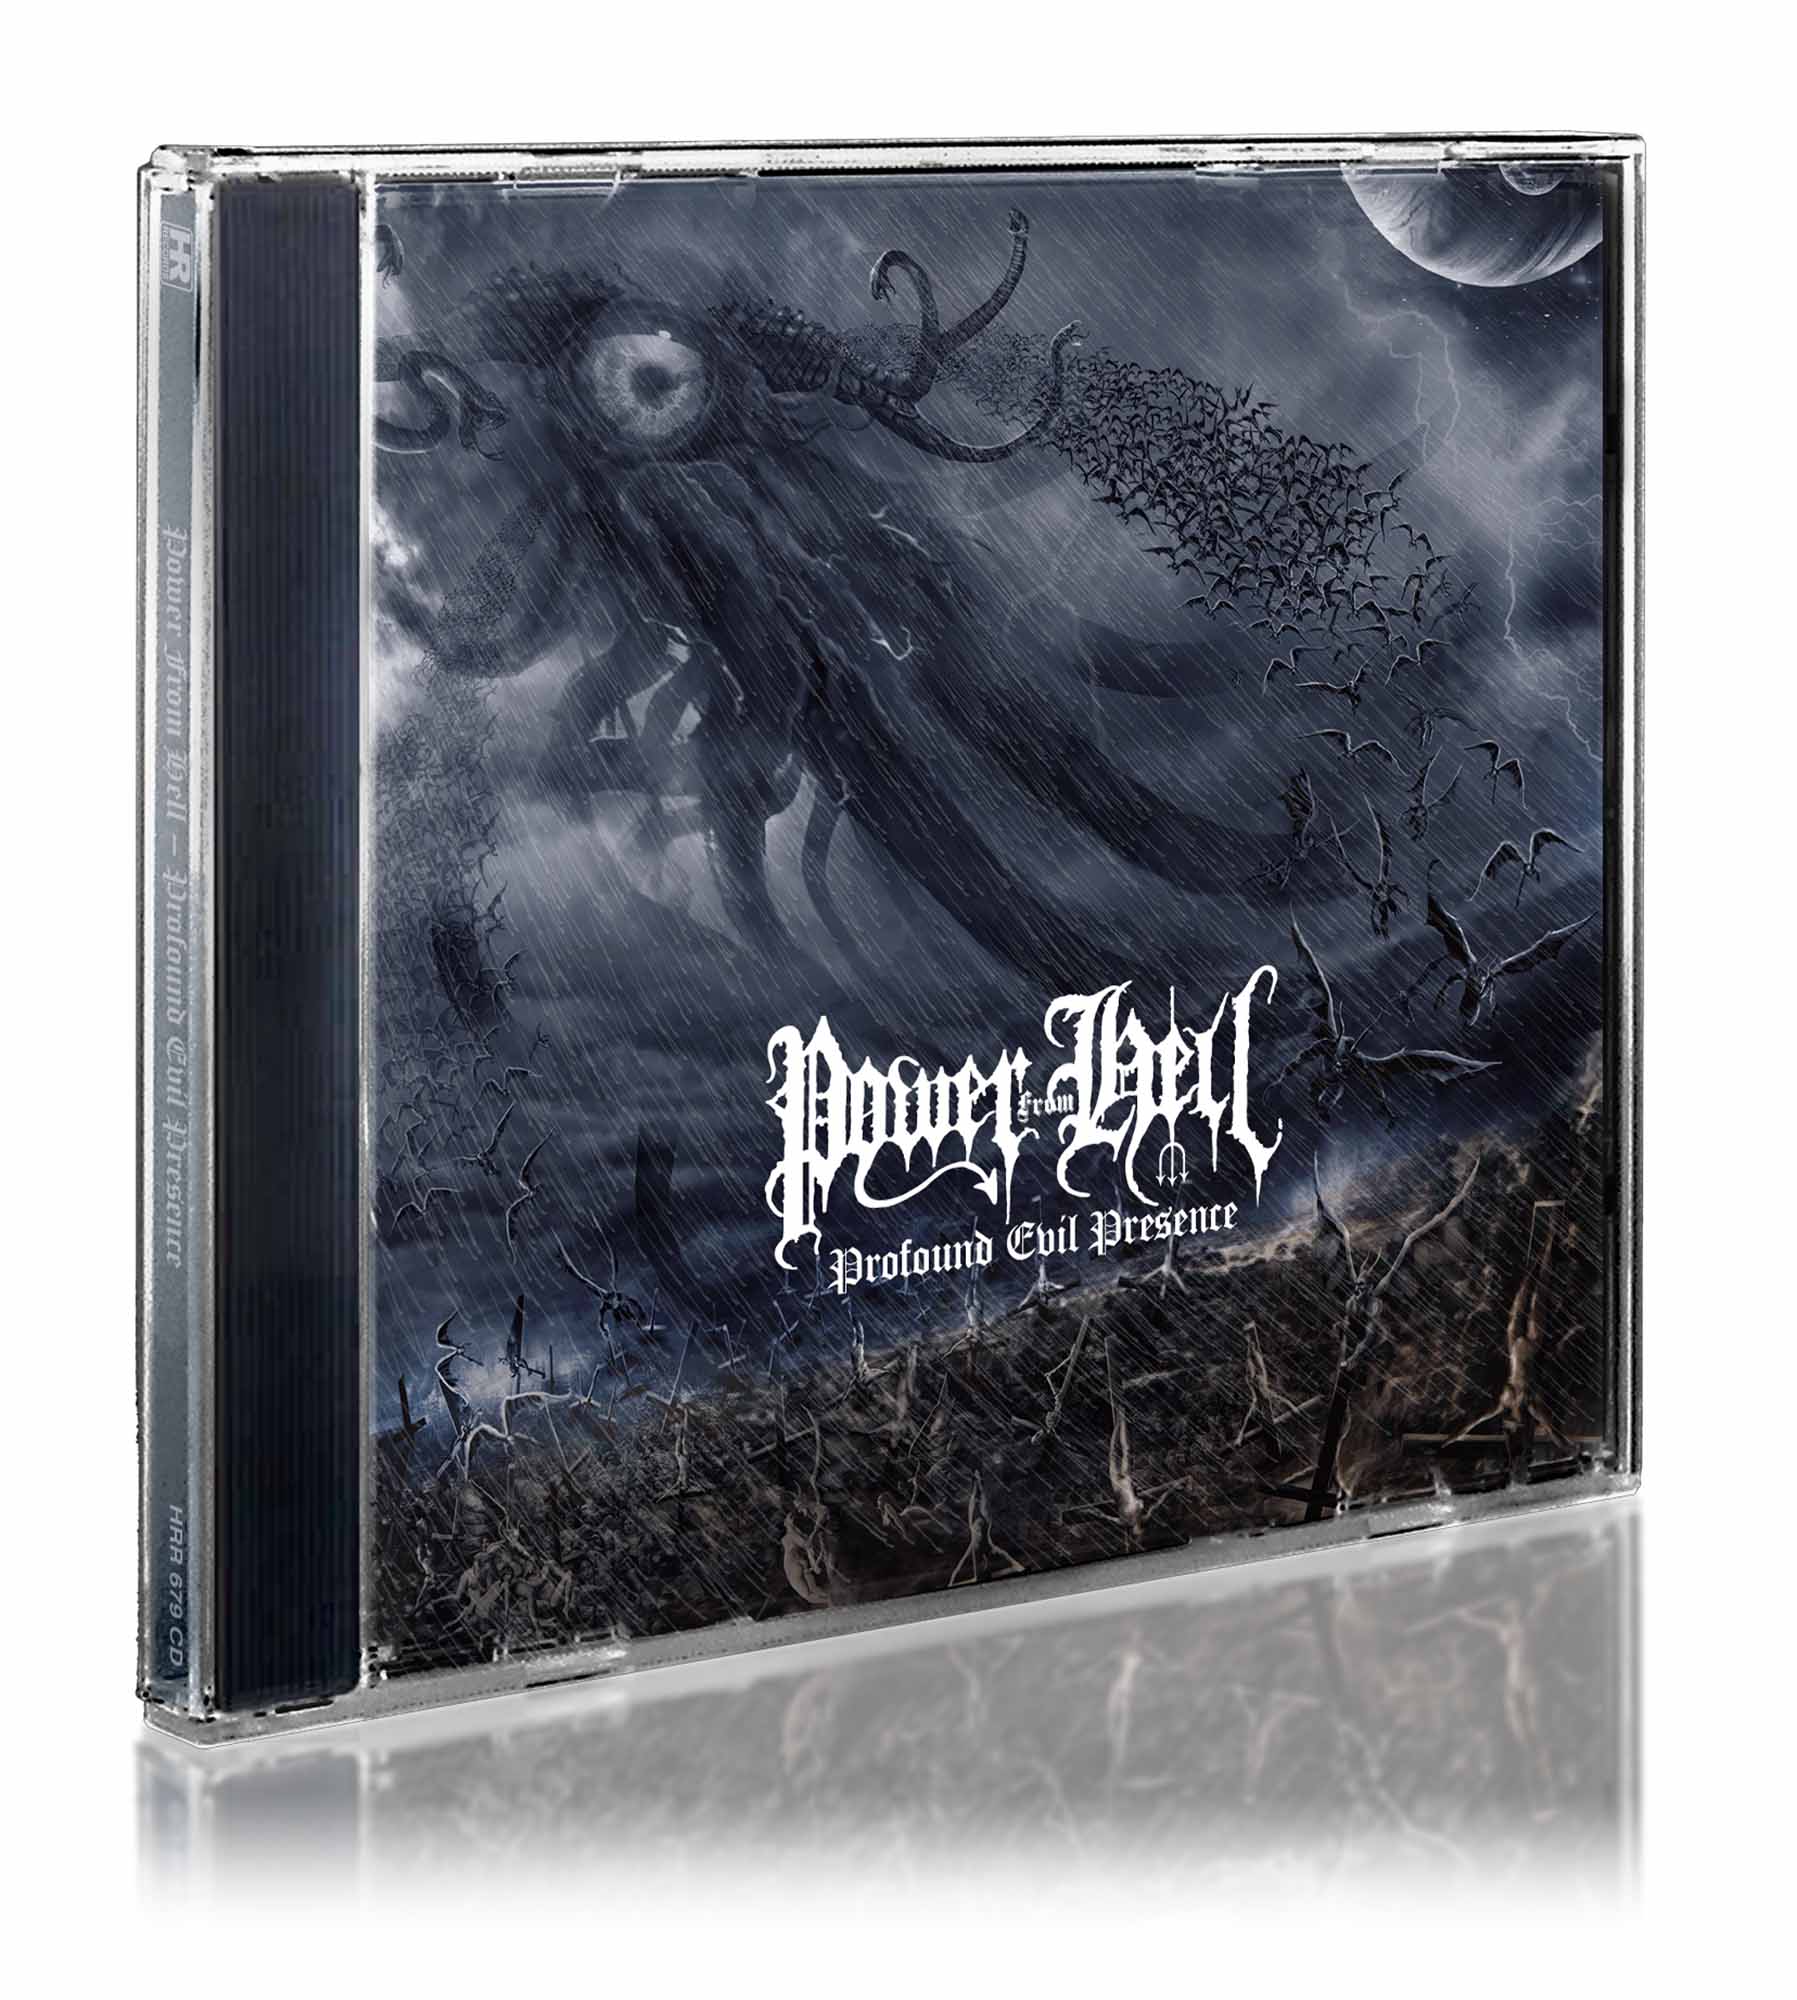 POWER FROM HELL - Profound Evil Presence  CD